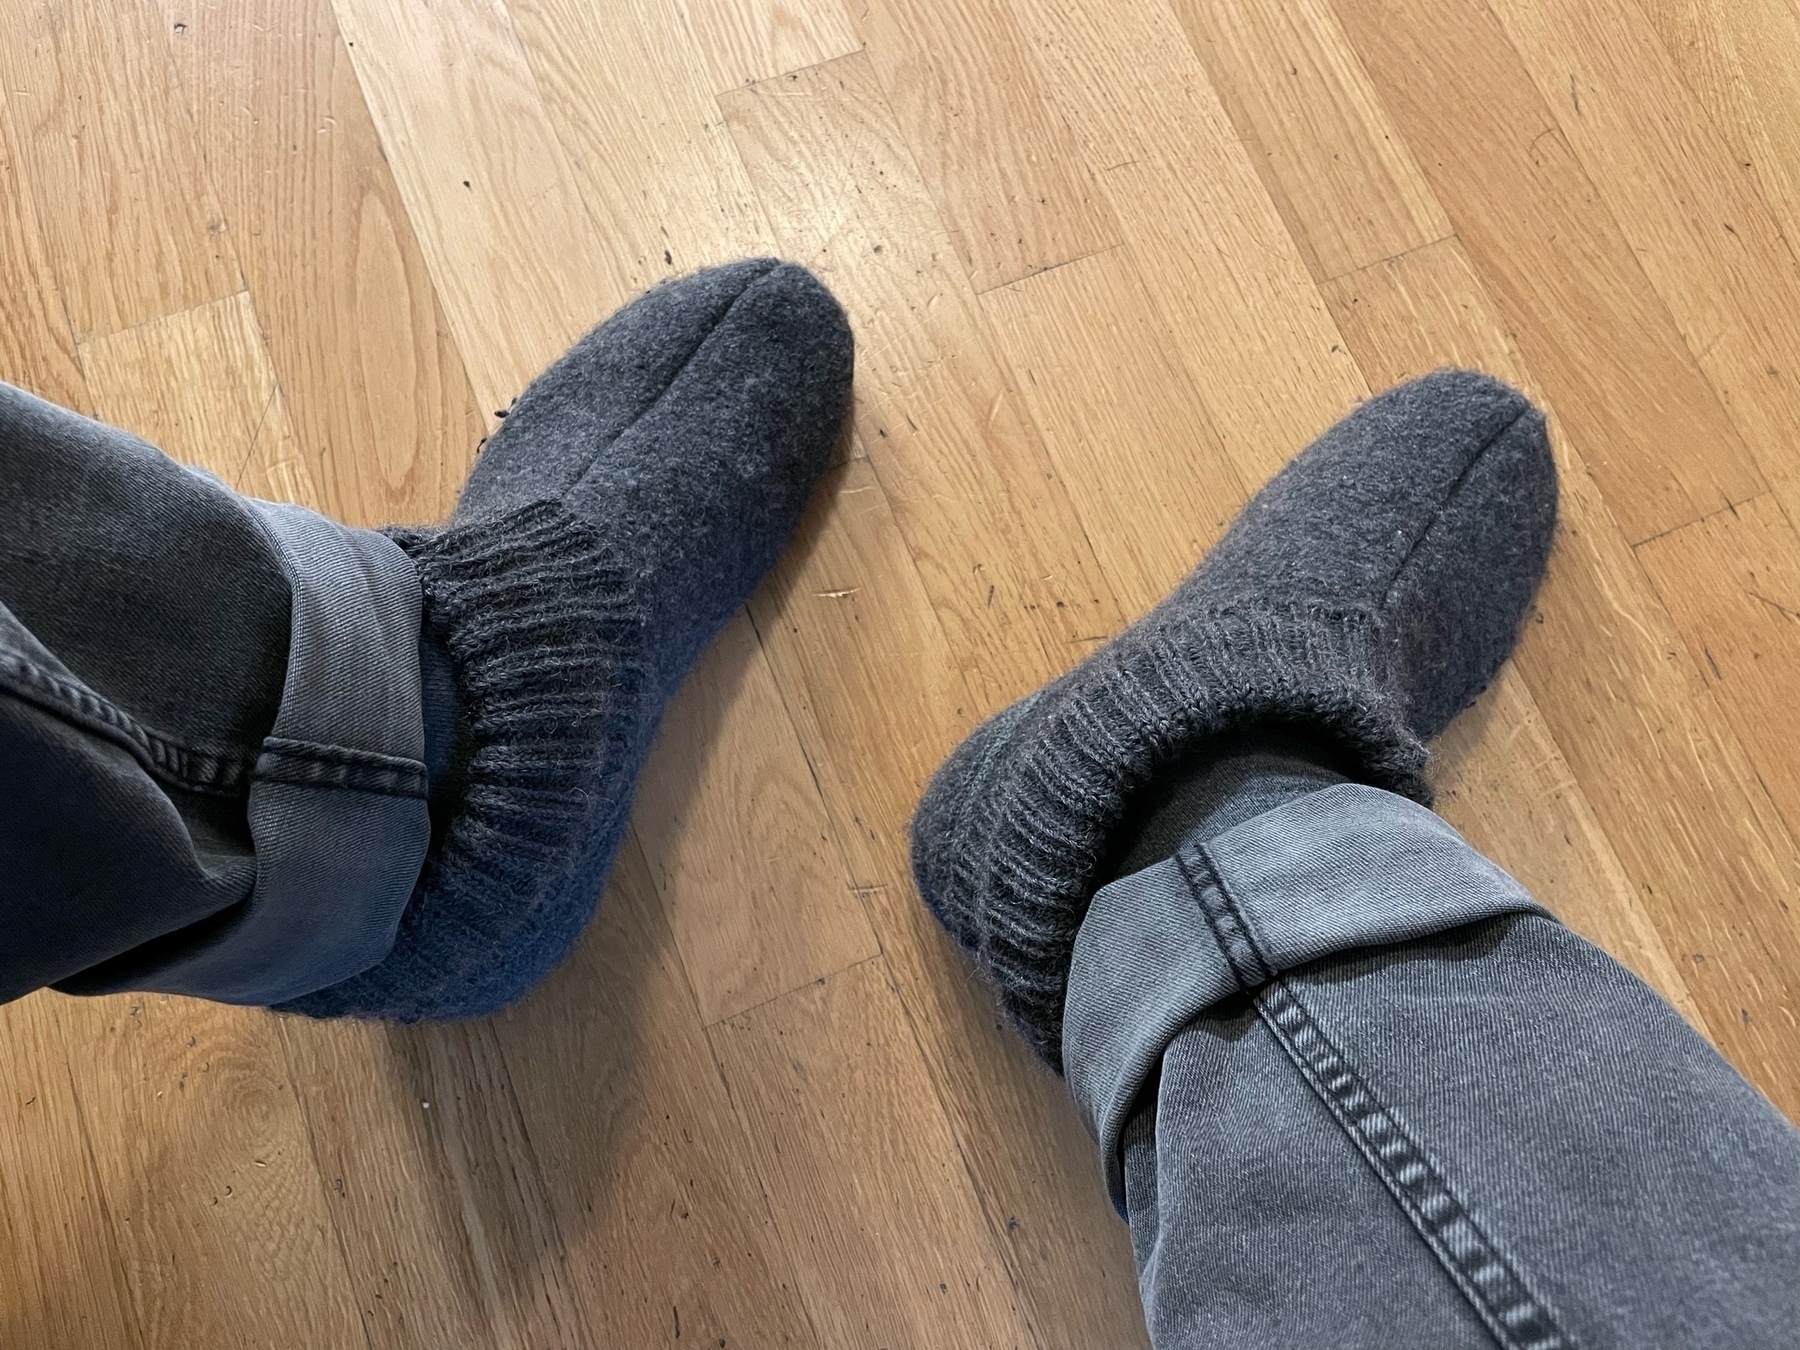 My feet with wool slippers